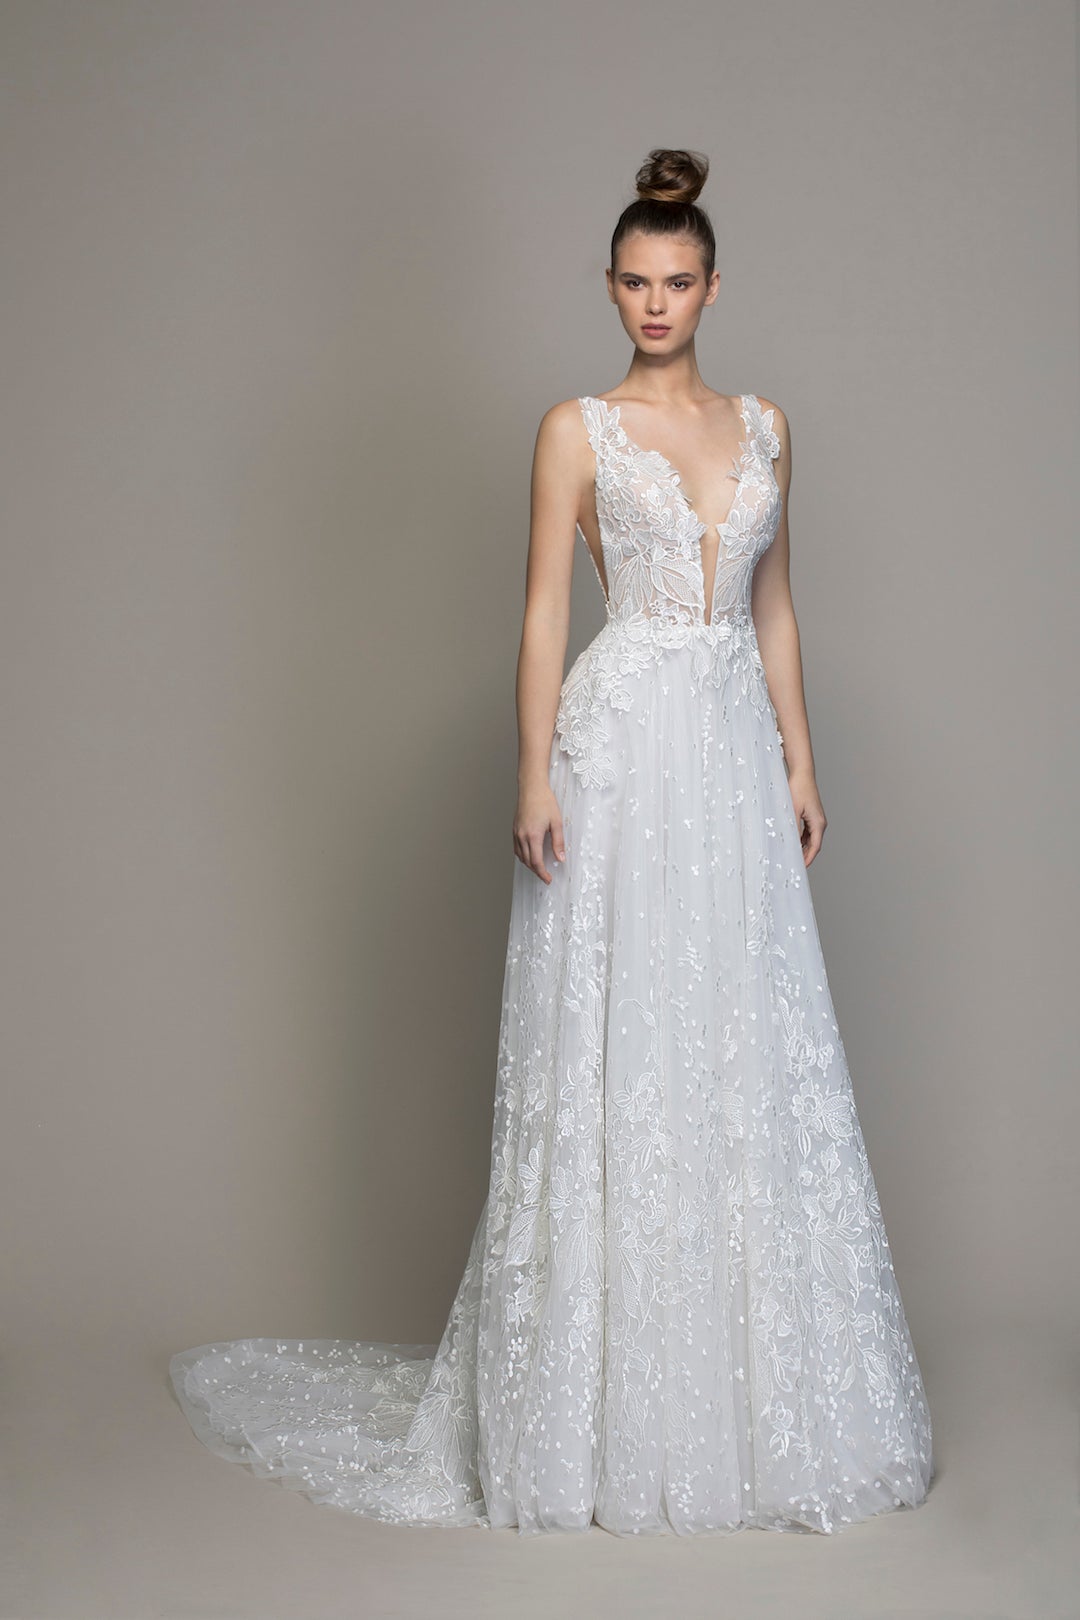 Pnina Tornai's new LOVE 2020 Collection is out! This is style 14767